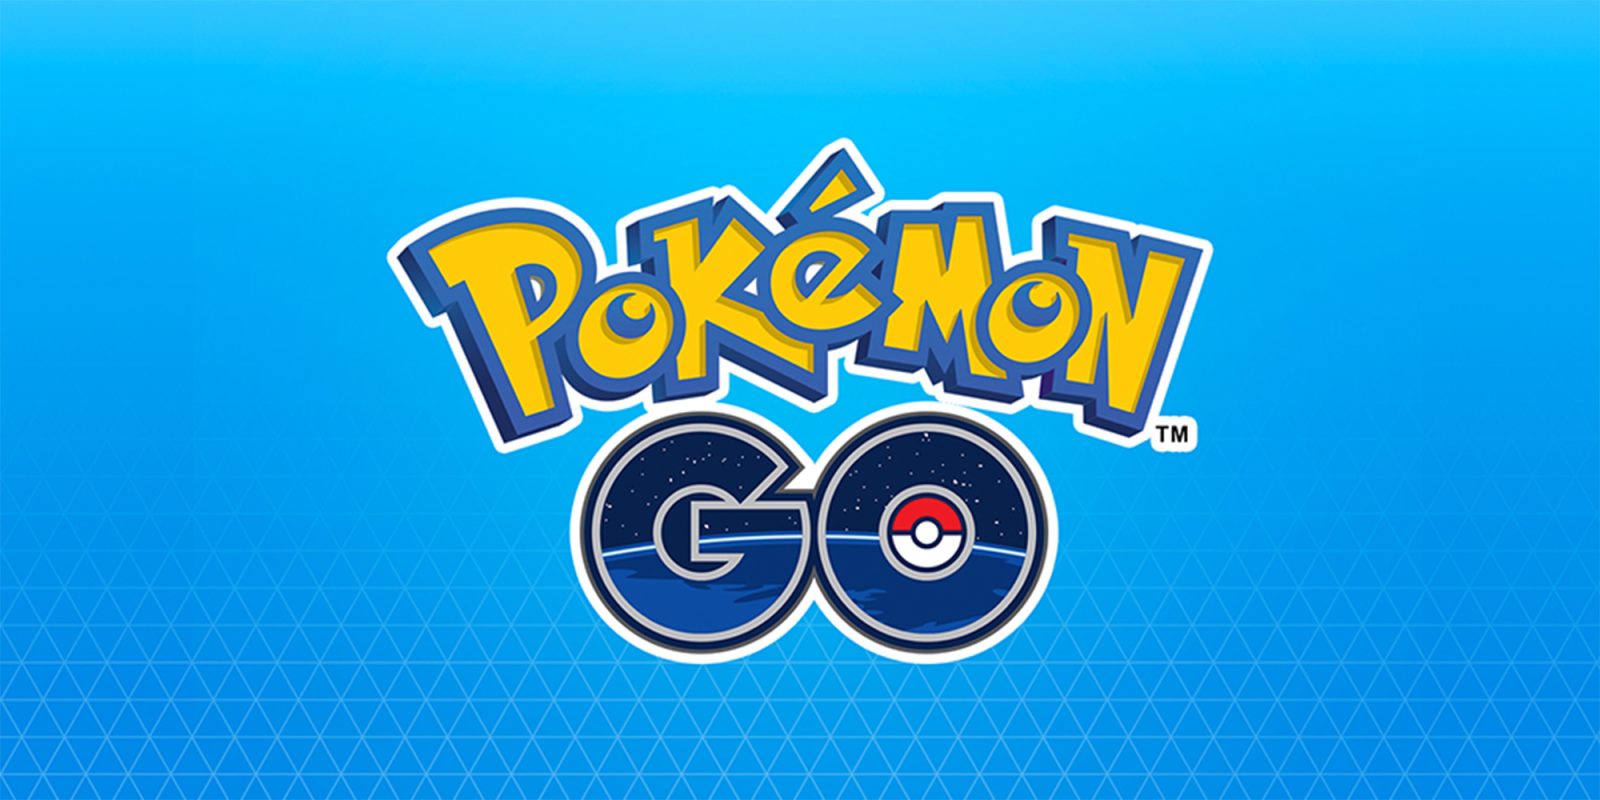 Pokemon Go might be a little weird right now with travel restrictions preventing people from getting out and exploring but it's set to get a bit more difficult for those with 32-bit Android phones.